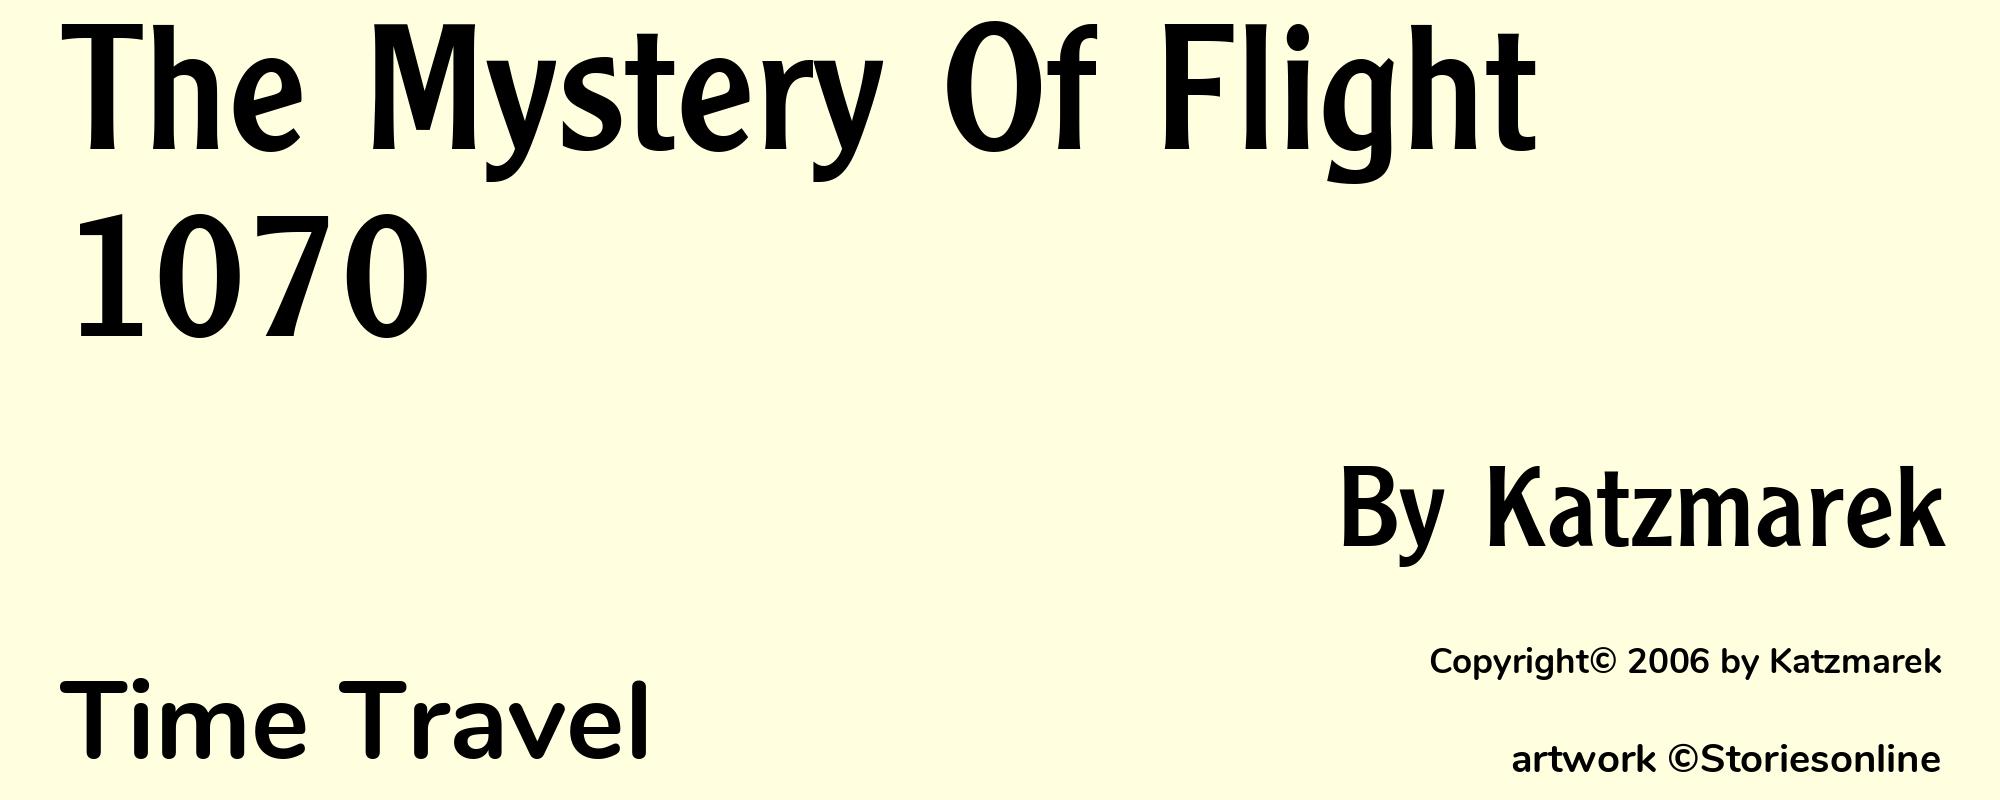 The Mystery Of Flight 1070 - Cover